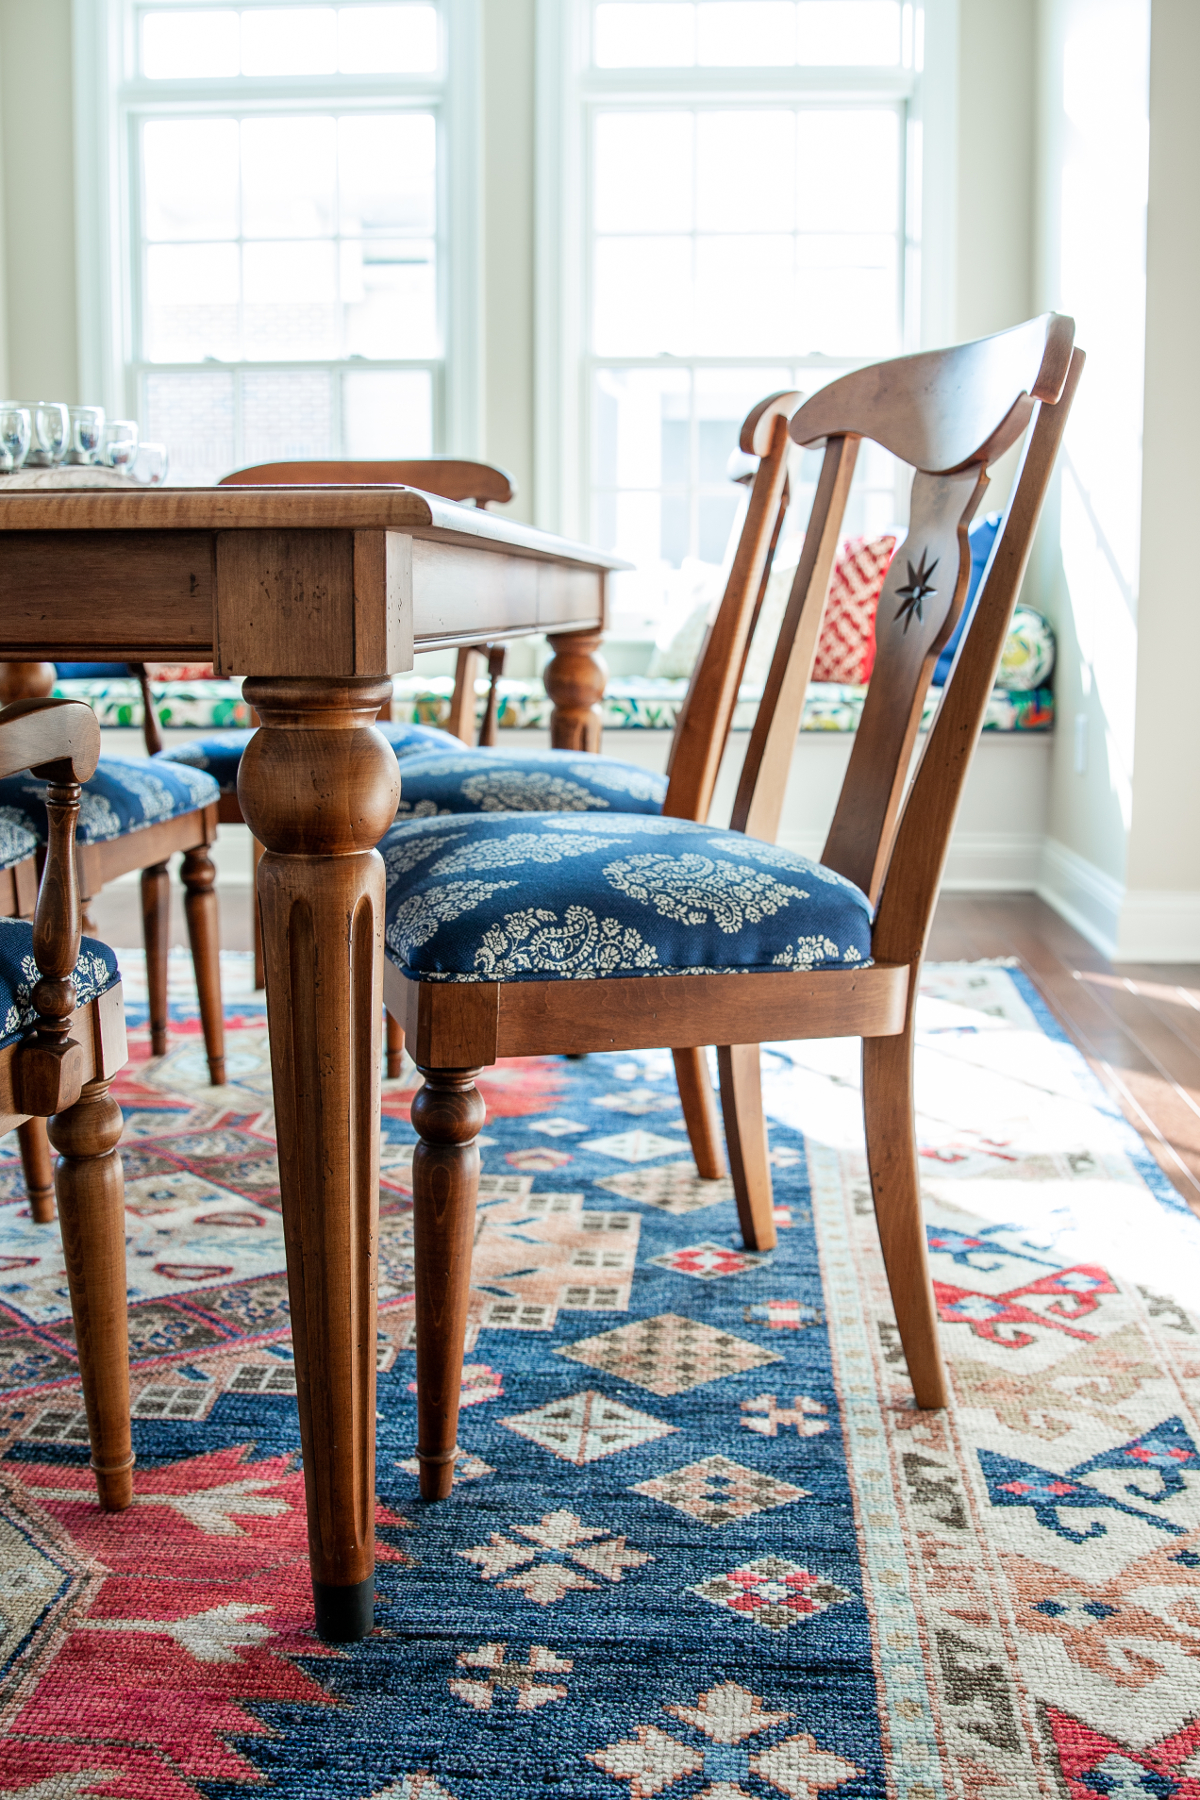 New cushion fabric brought life into this classic dining set Eclectic Interiors